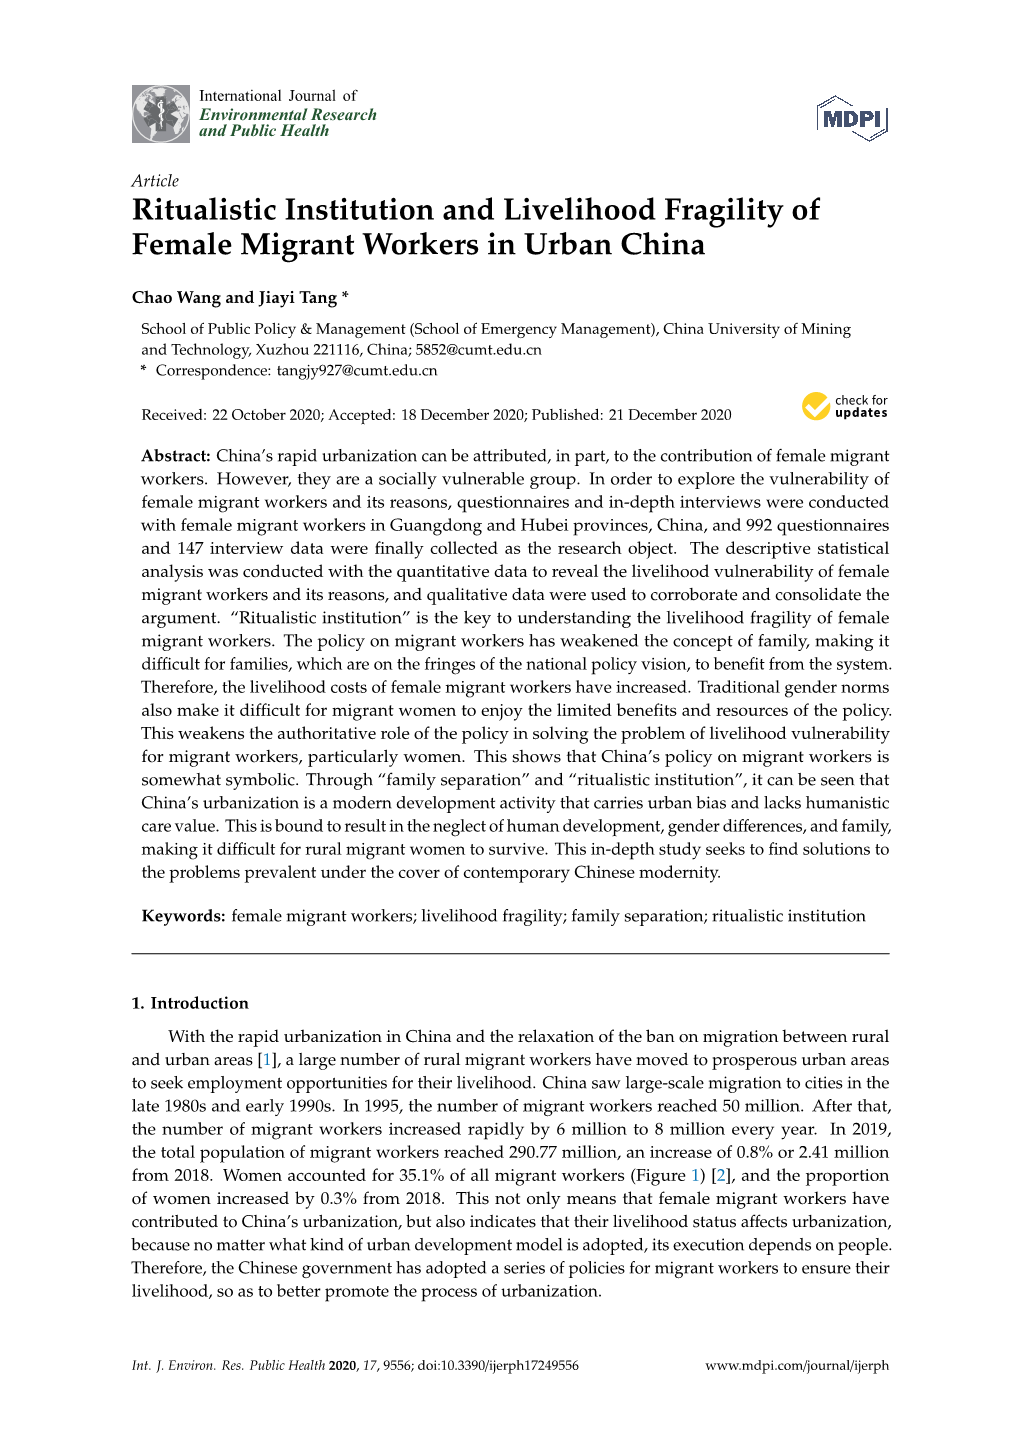 Ritualistic Institution and Livelihood Fragility of Female Migrant Workers in Urban China